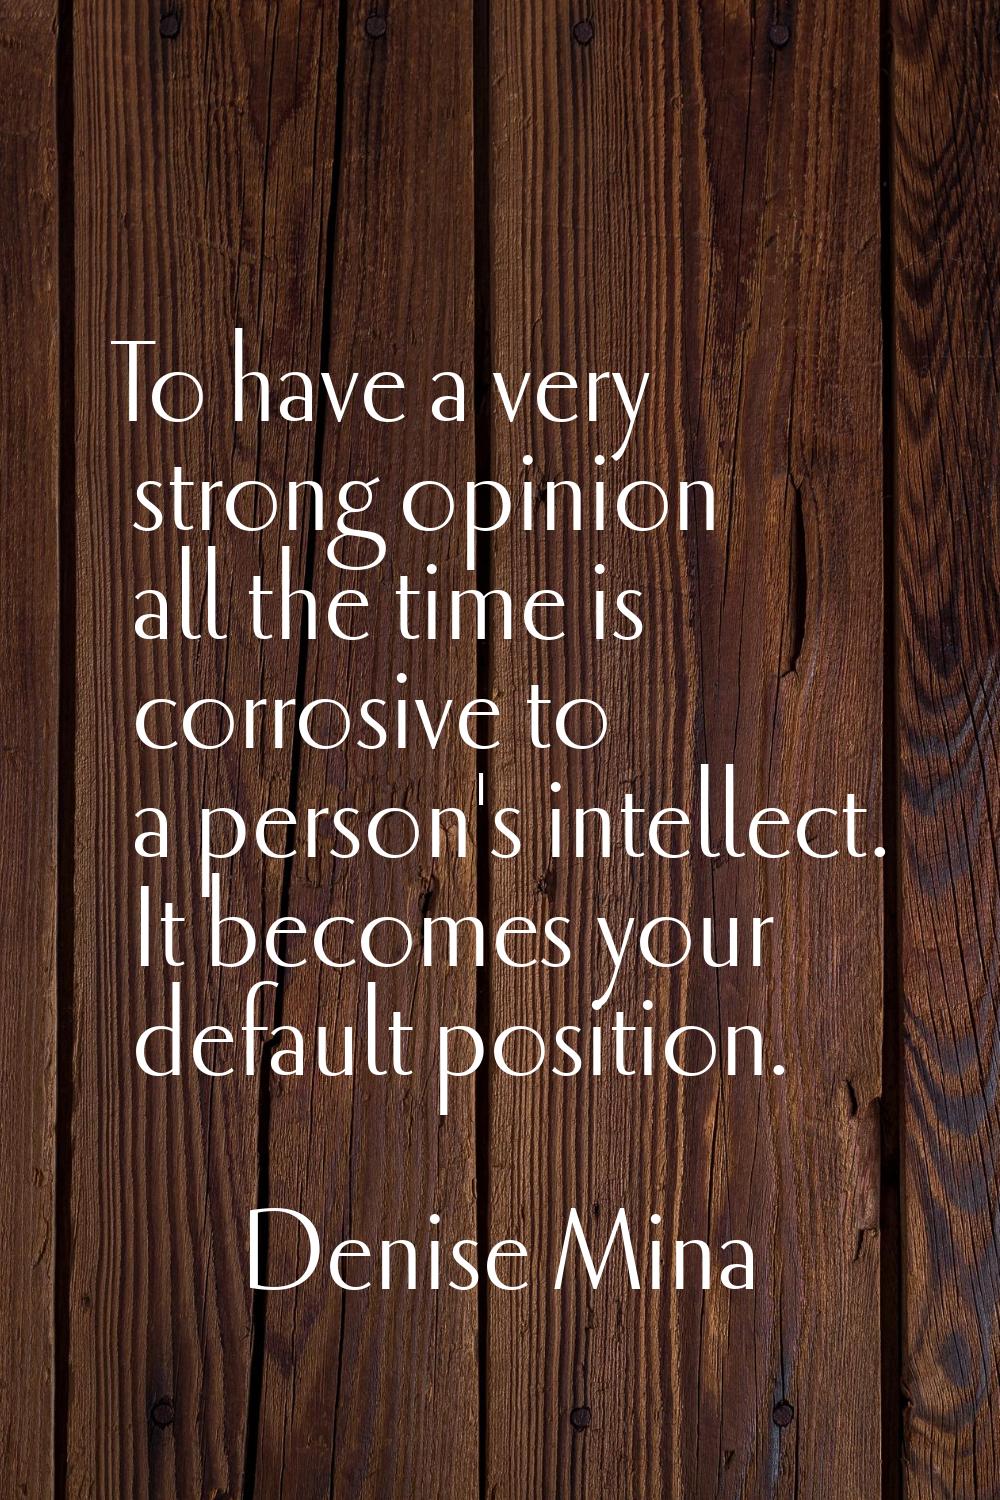 To have a very strong opinion all the time is corrosive to a person's intellect. It becomes your de